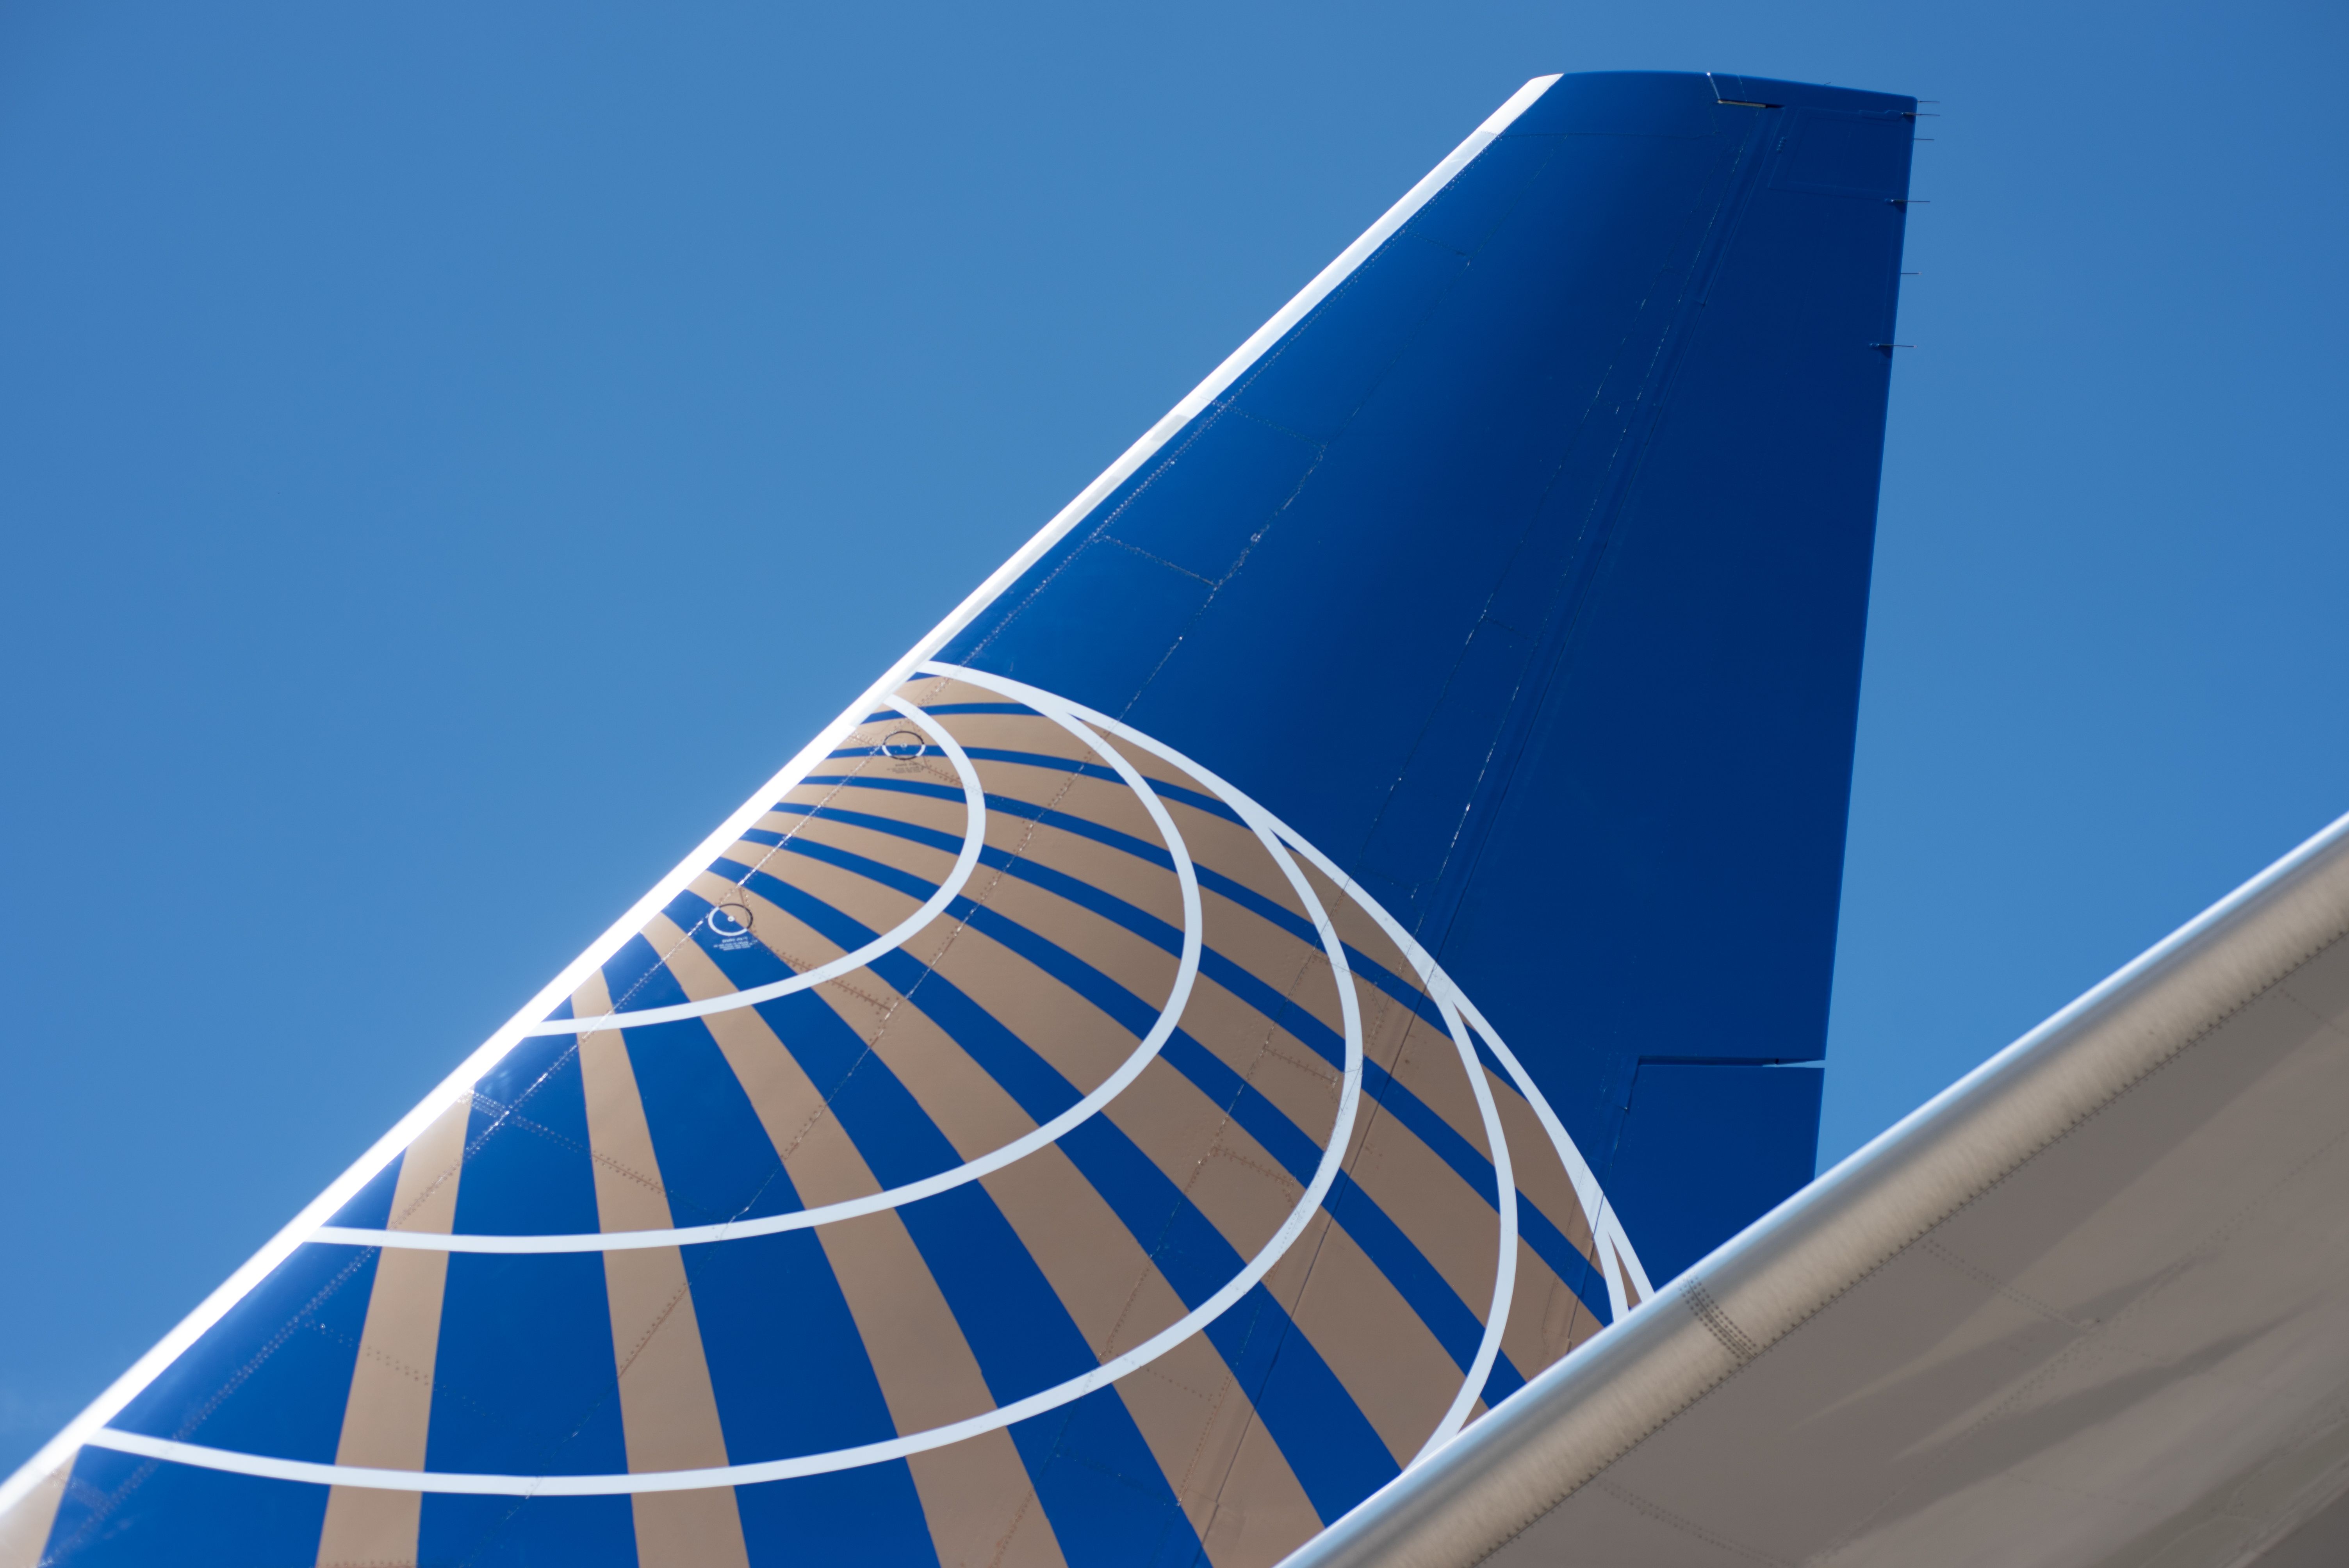 United Airlines aircraft tail